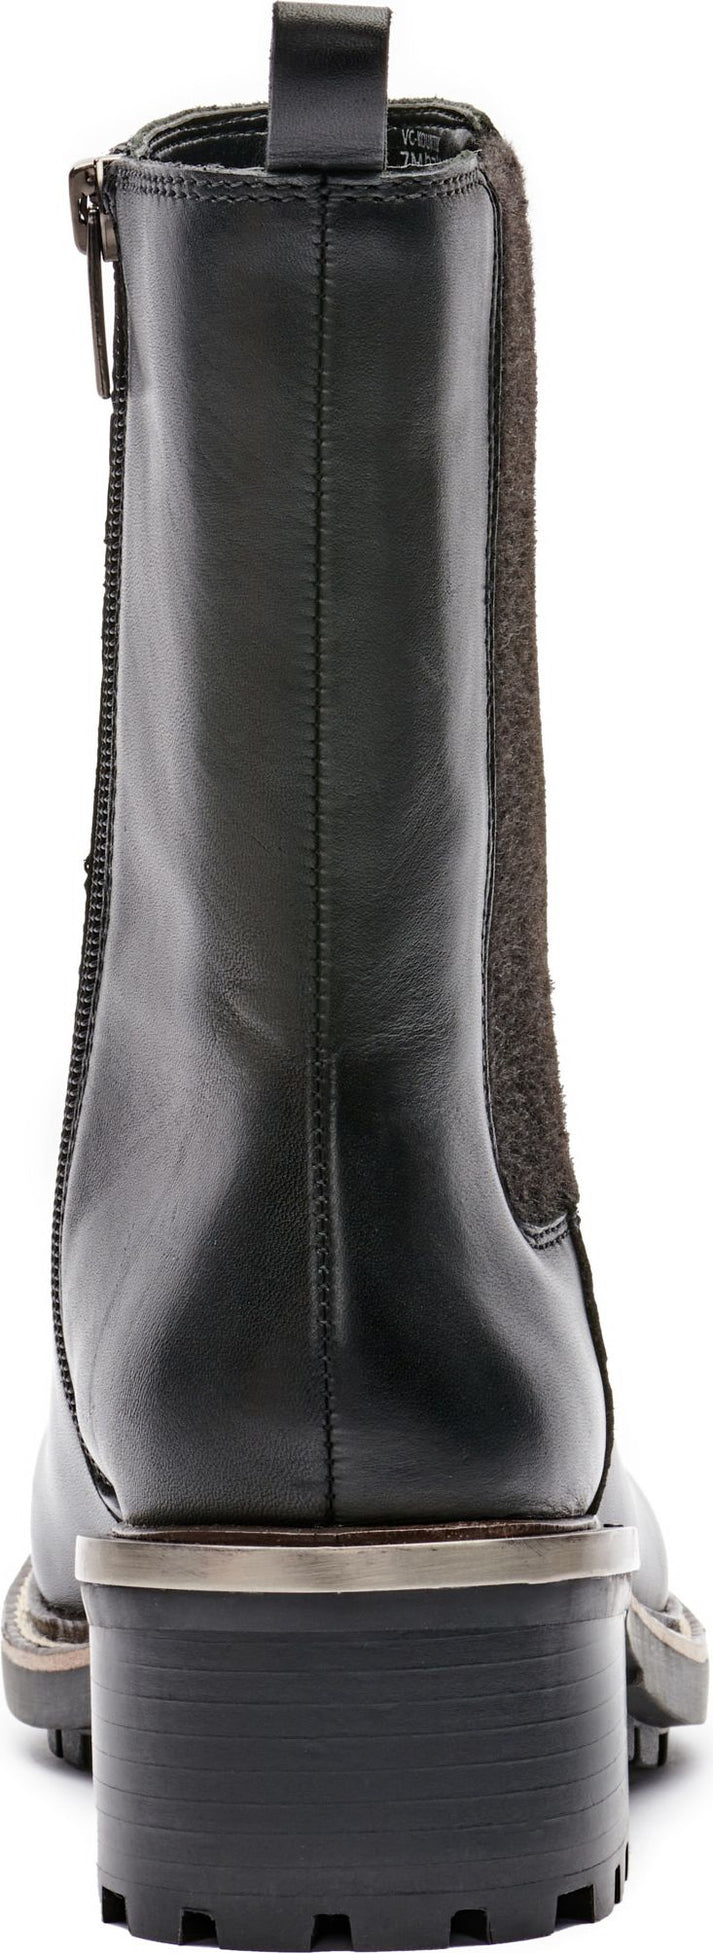 Vince Camuto Boots Kourtly Leather Black